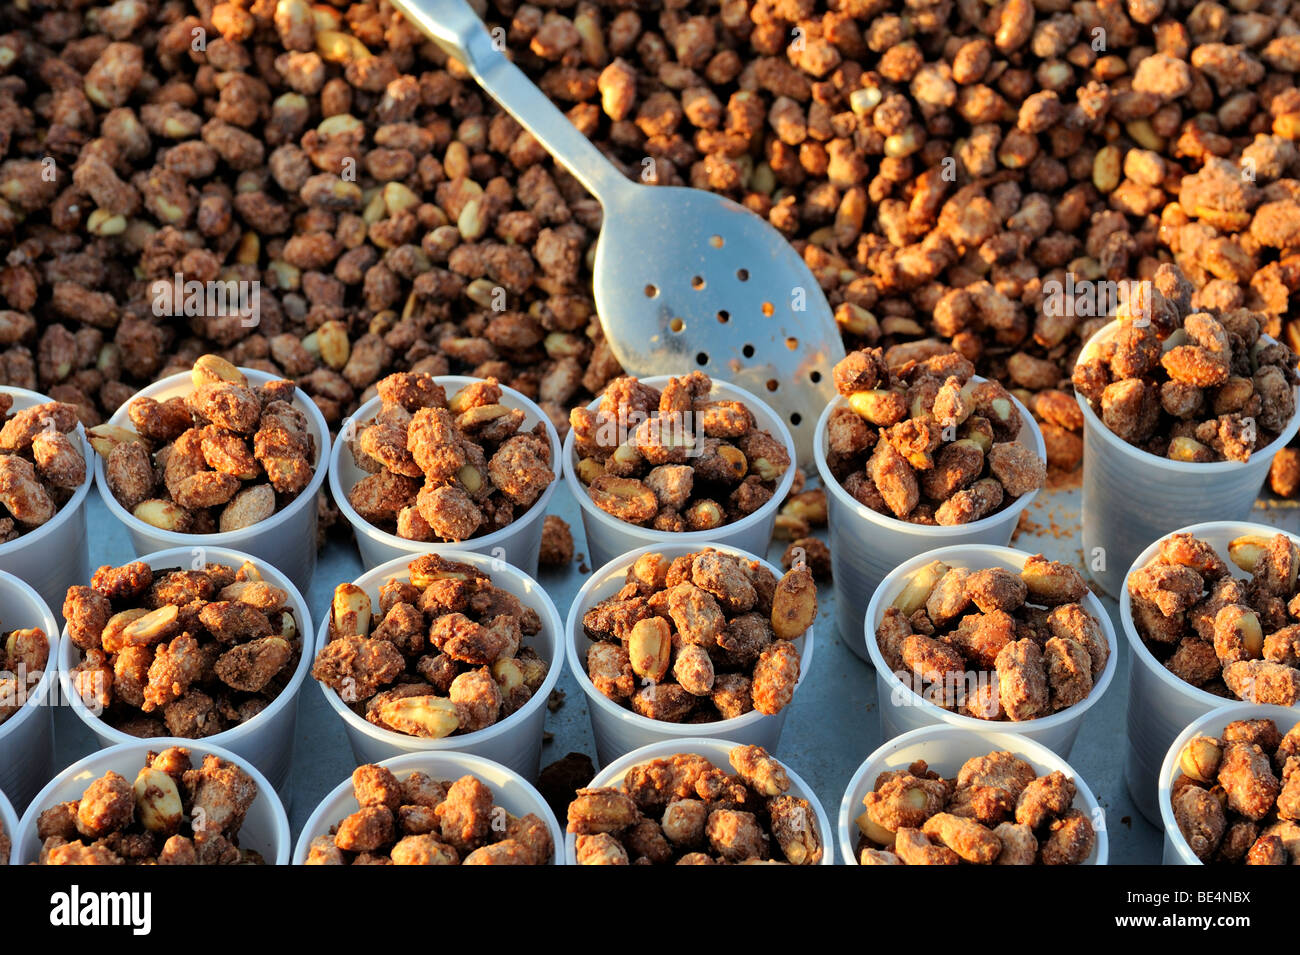 Candied peanuts at a stall in London City, England, United Kingdom, Europe Stock Photo